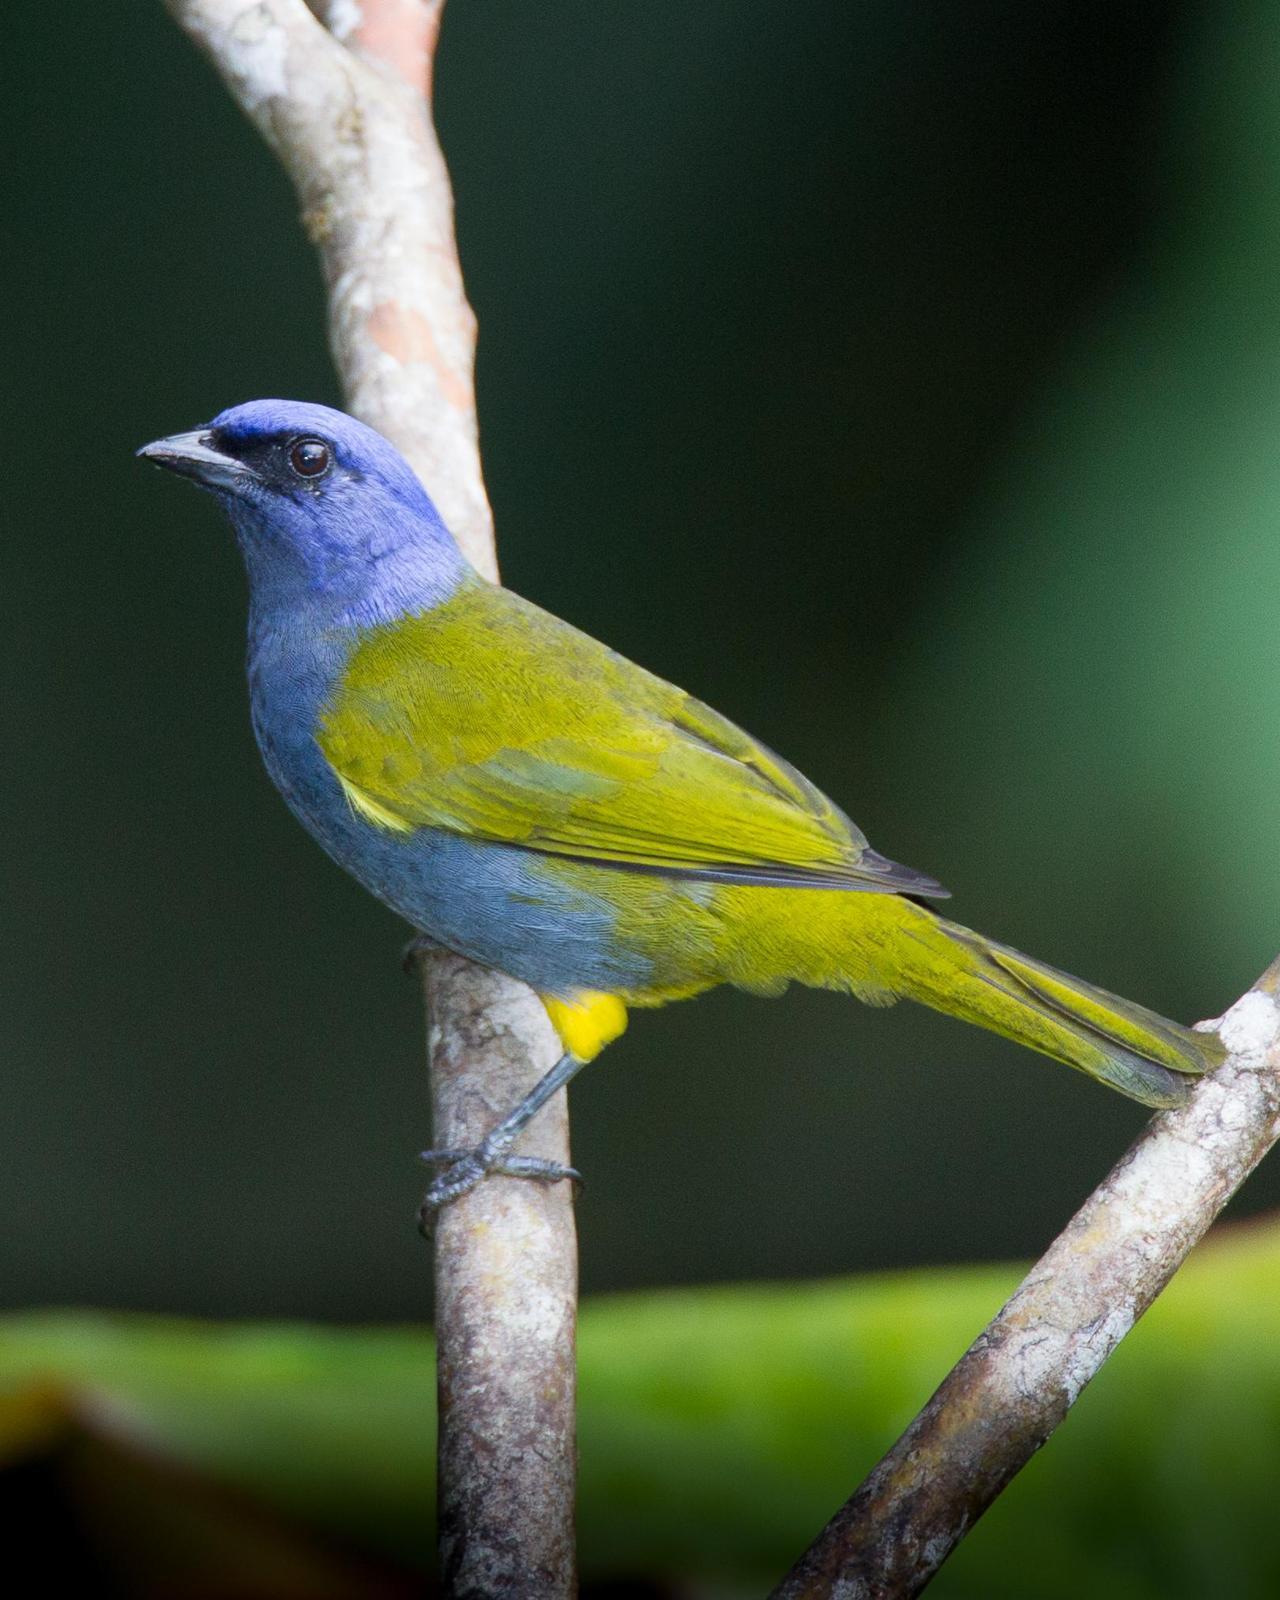 Blue-capped Tanager Photo by Robert Lewis